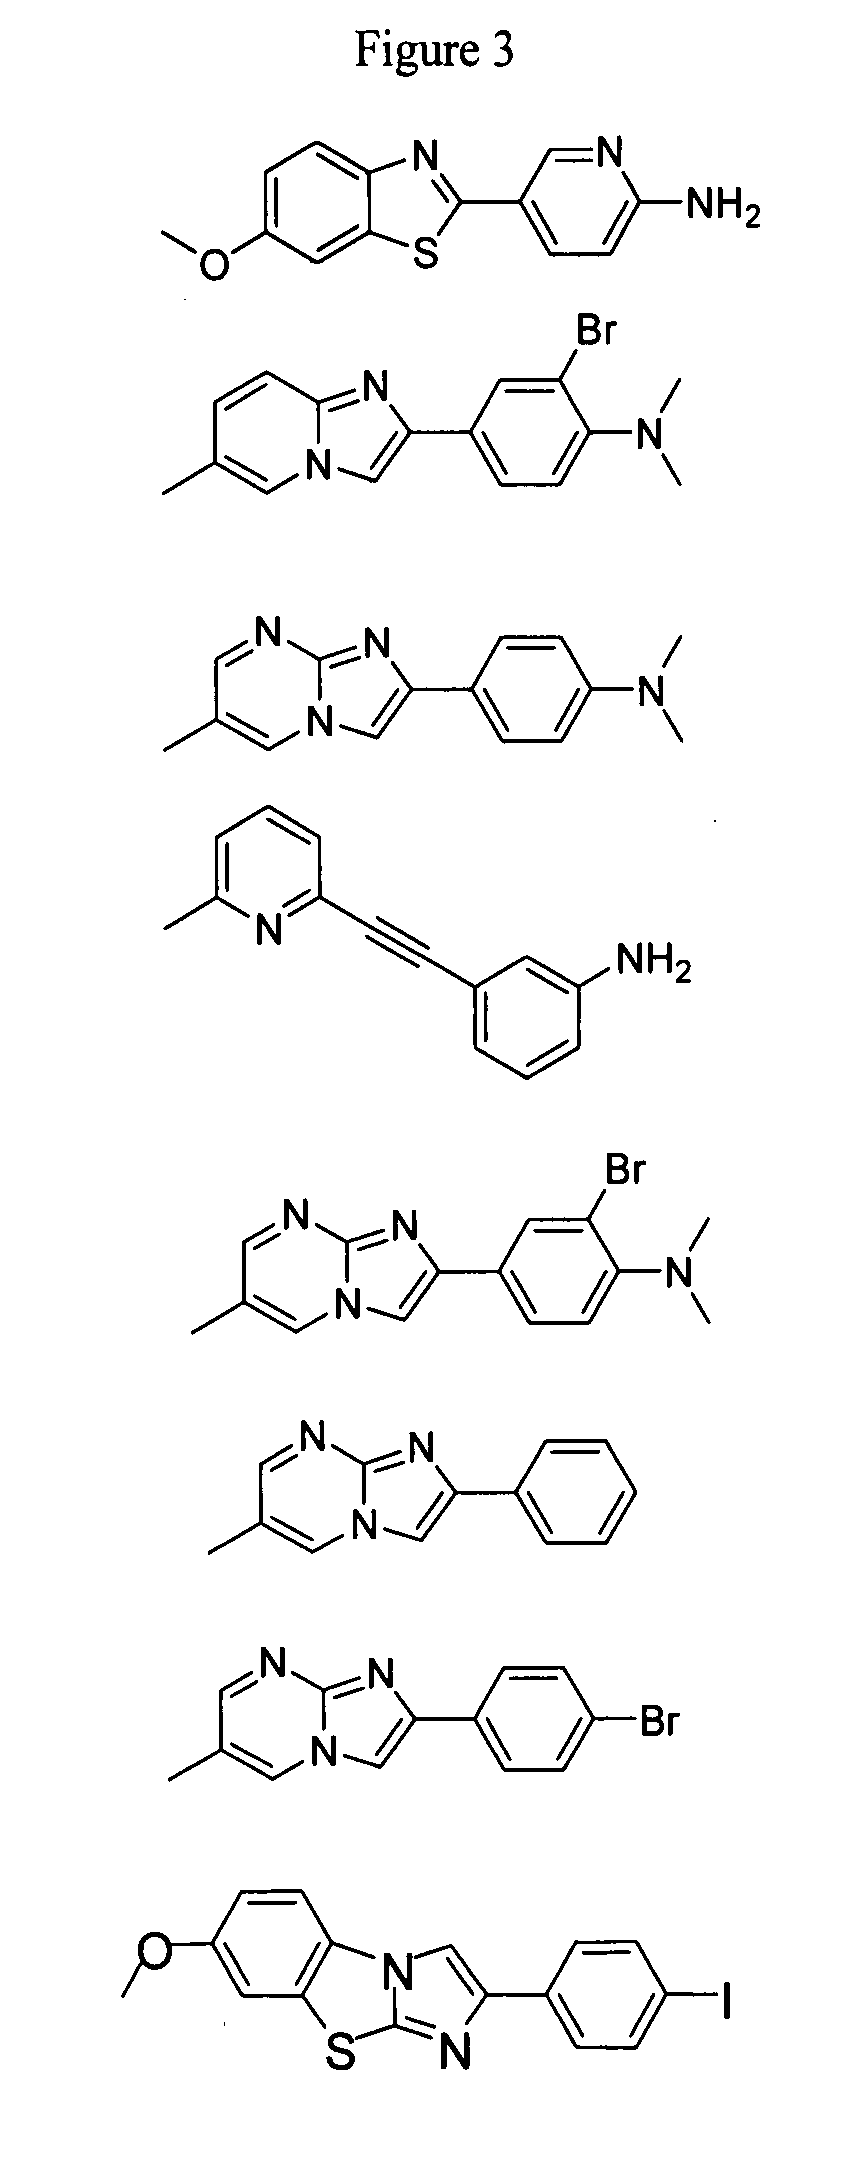 Compounds and amyloid probes thereof for therapeutic and imaging uses